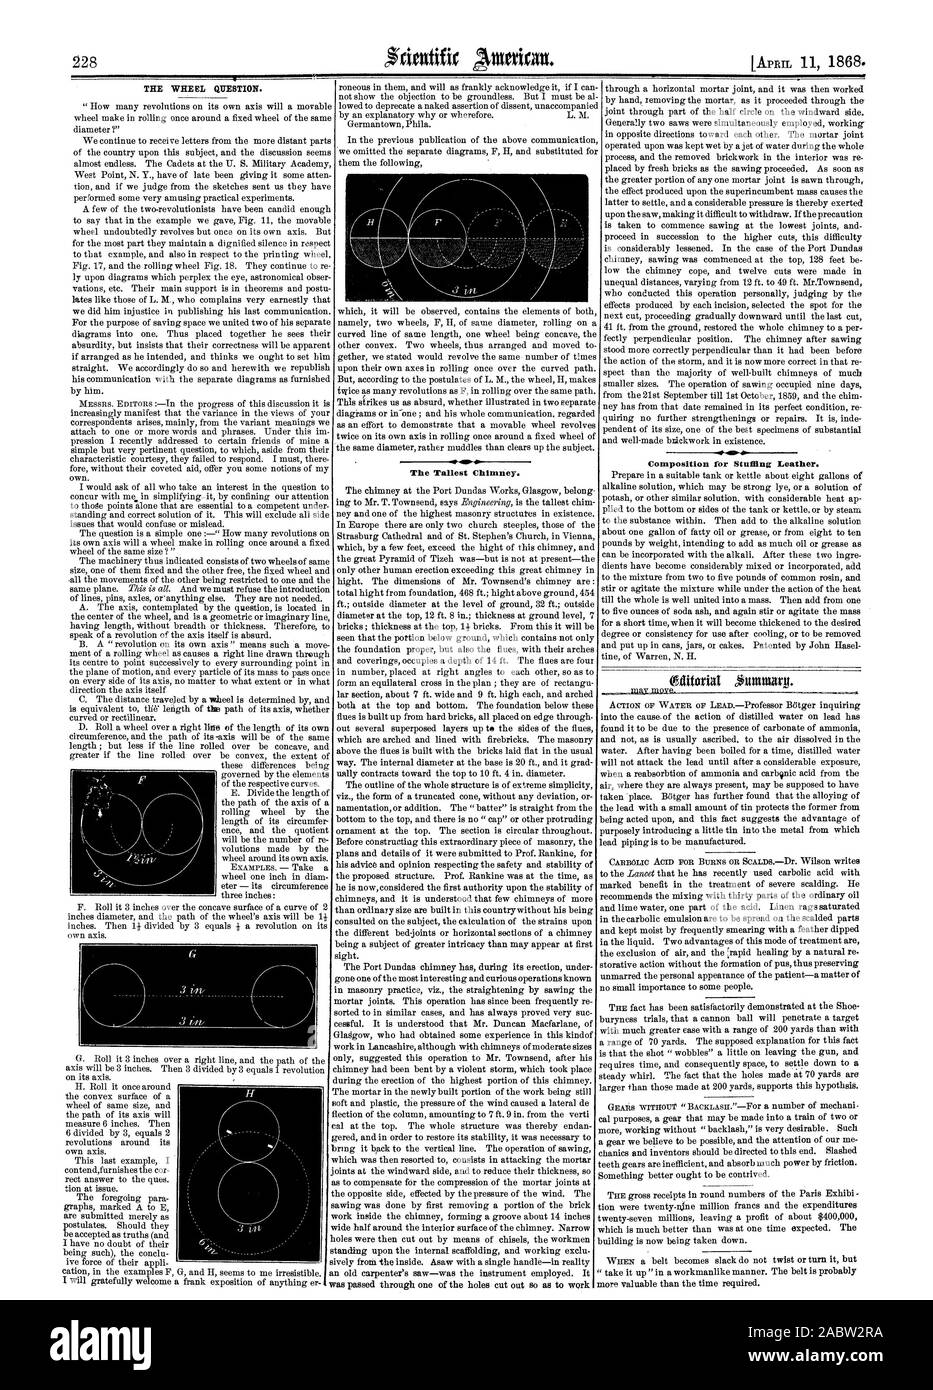 228 Composition for Stuffing Leather., scientific american, 1868-04-11 Stock Photo